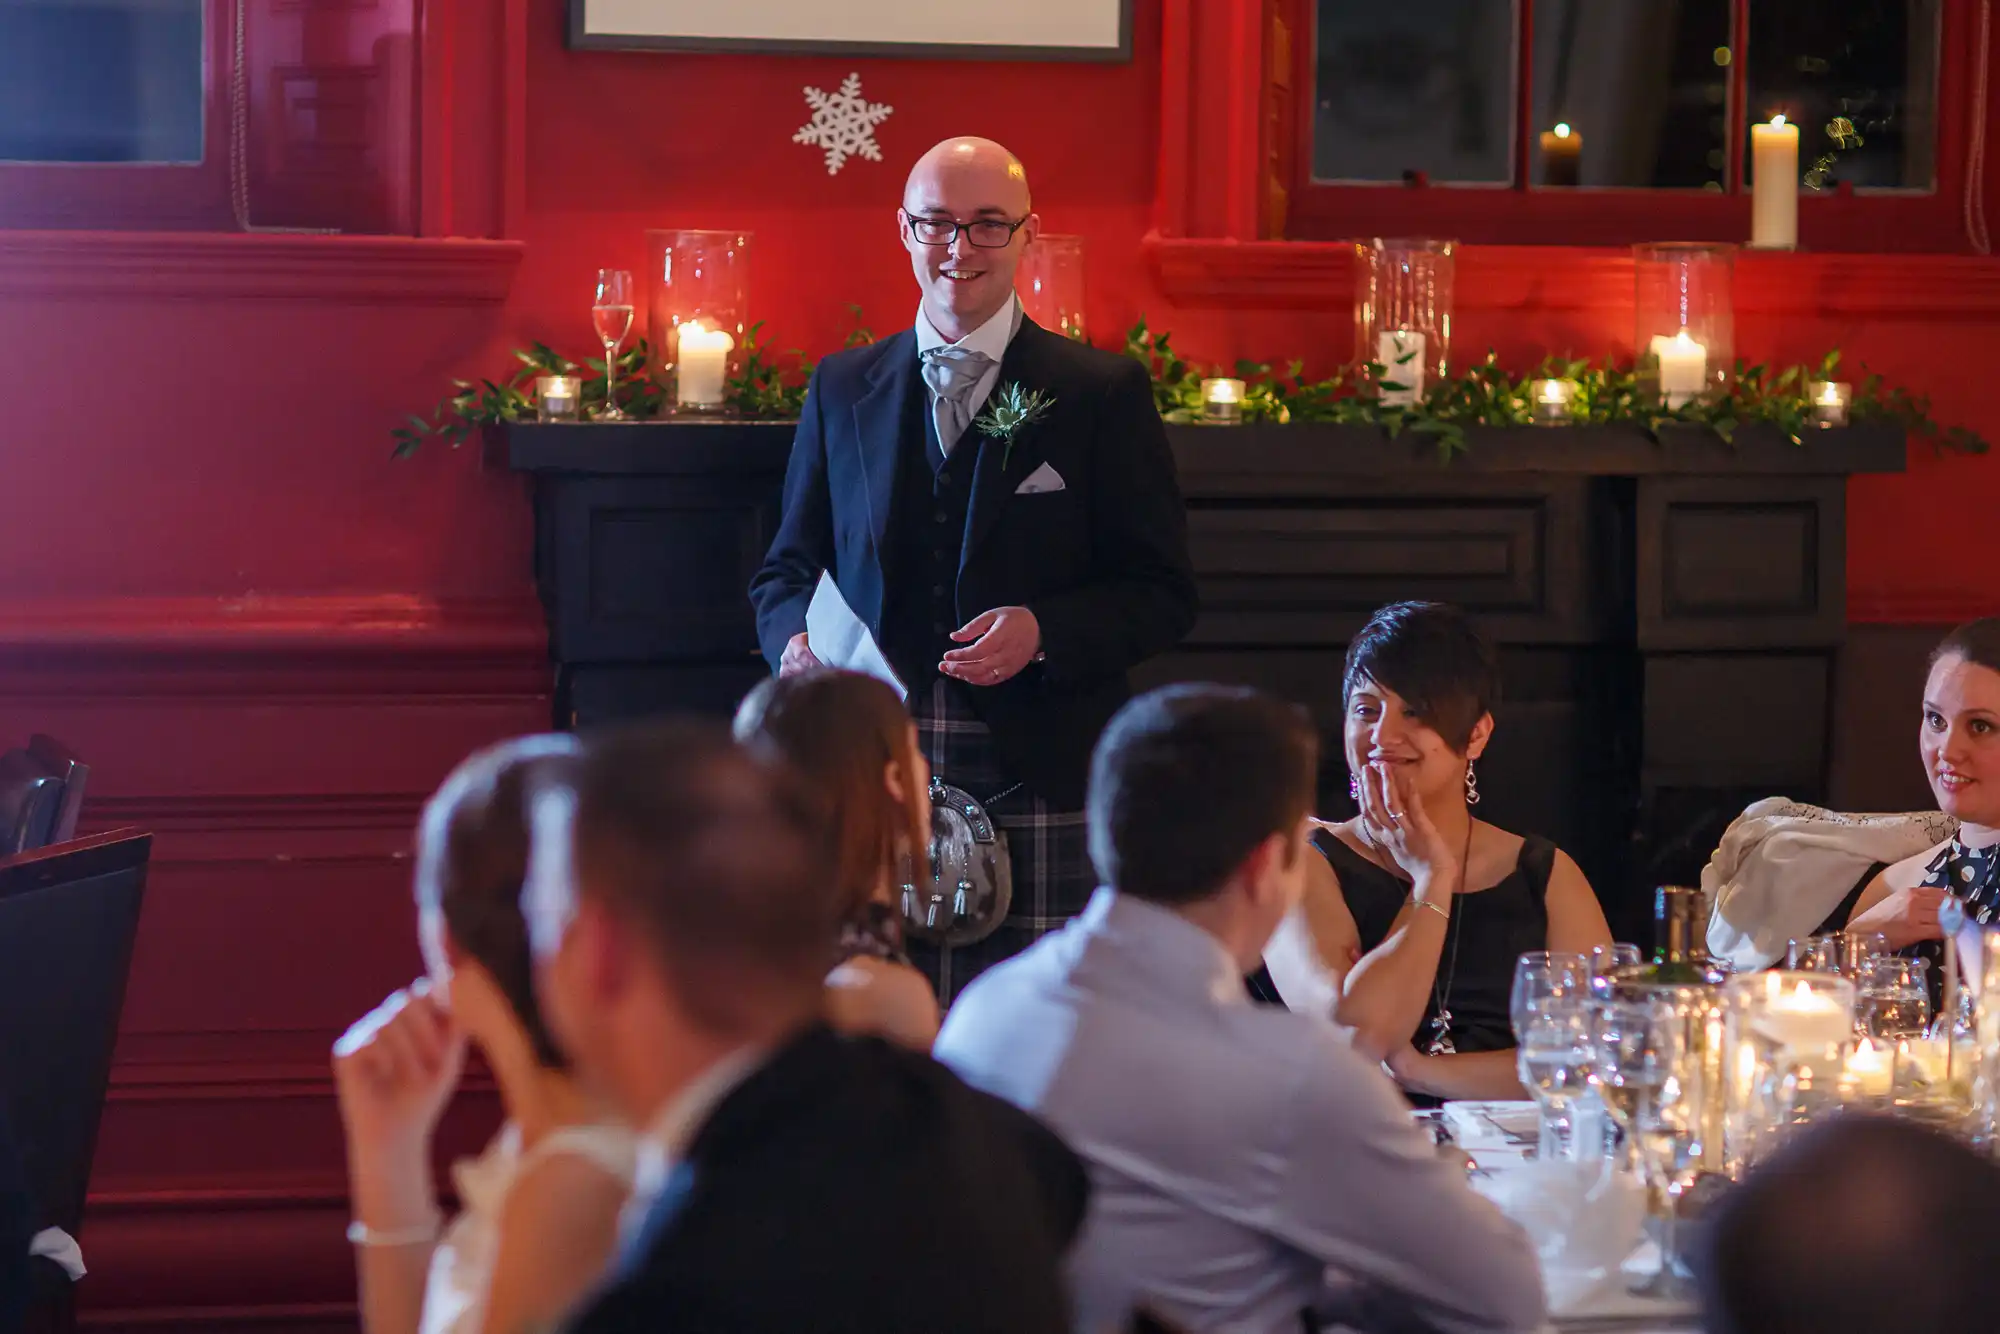 Man giving a speech at a wedding reception in a room with red walls, lit candles, and guests listening at dinner tables.